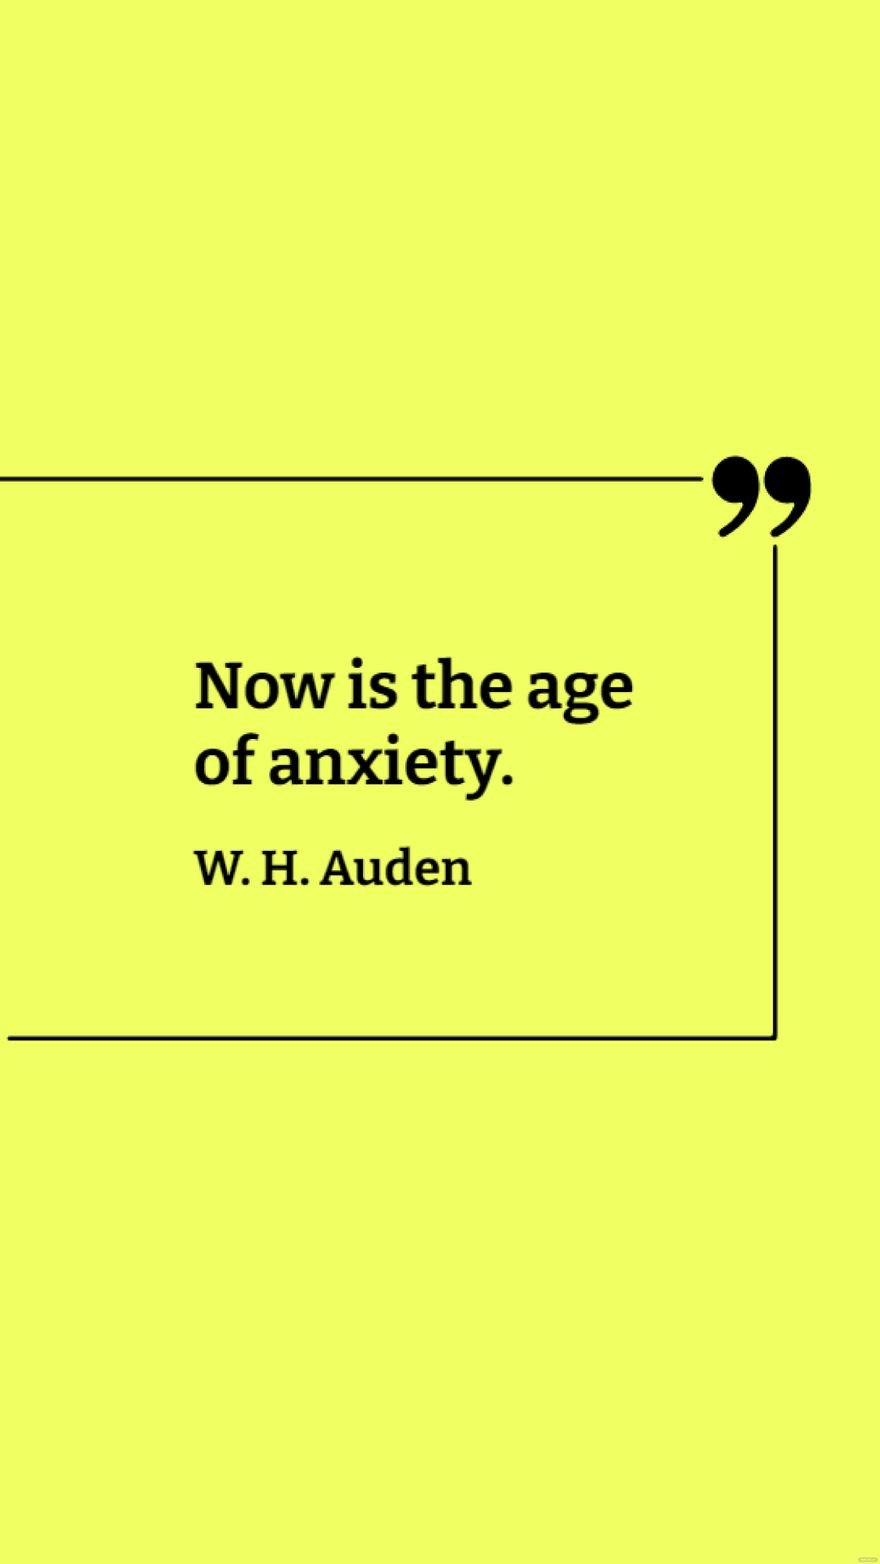 W. H. Auden - Now is the age of anxiety. in JPG